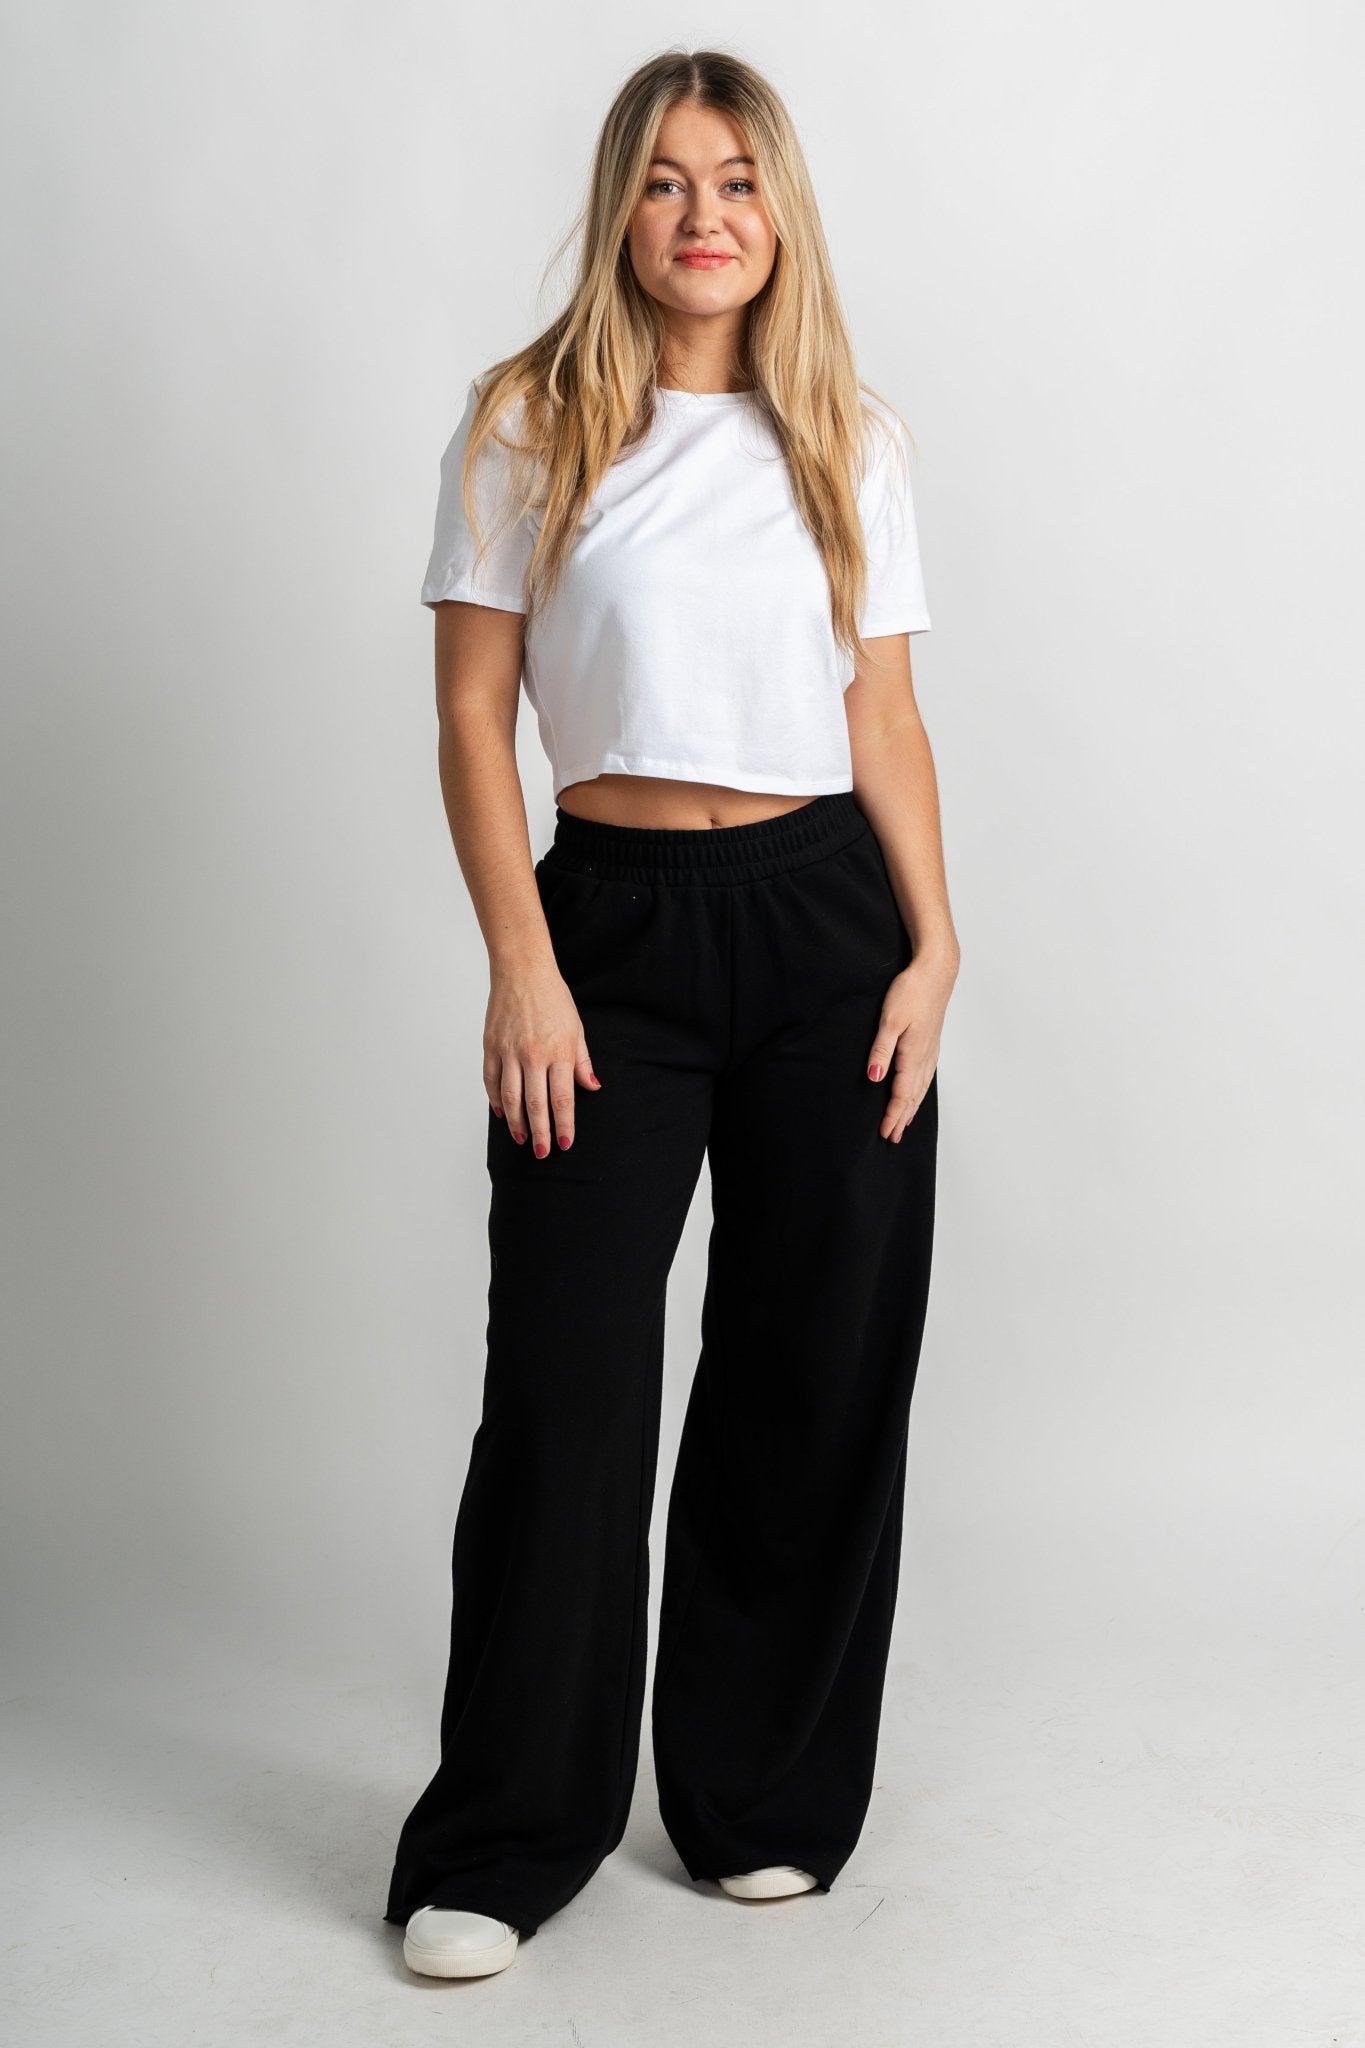 Vanessa wide leg lounge pant black - Adorable Pants - Stylish Comfortable Outfits at Lush Fashion Lounge Boutique in OKC